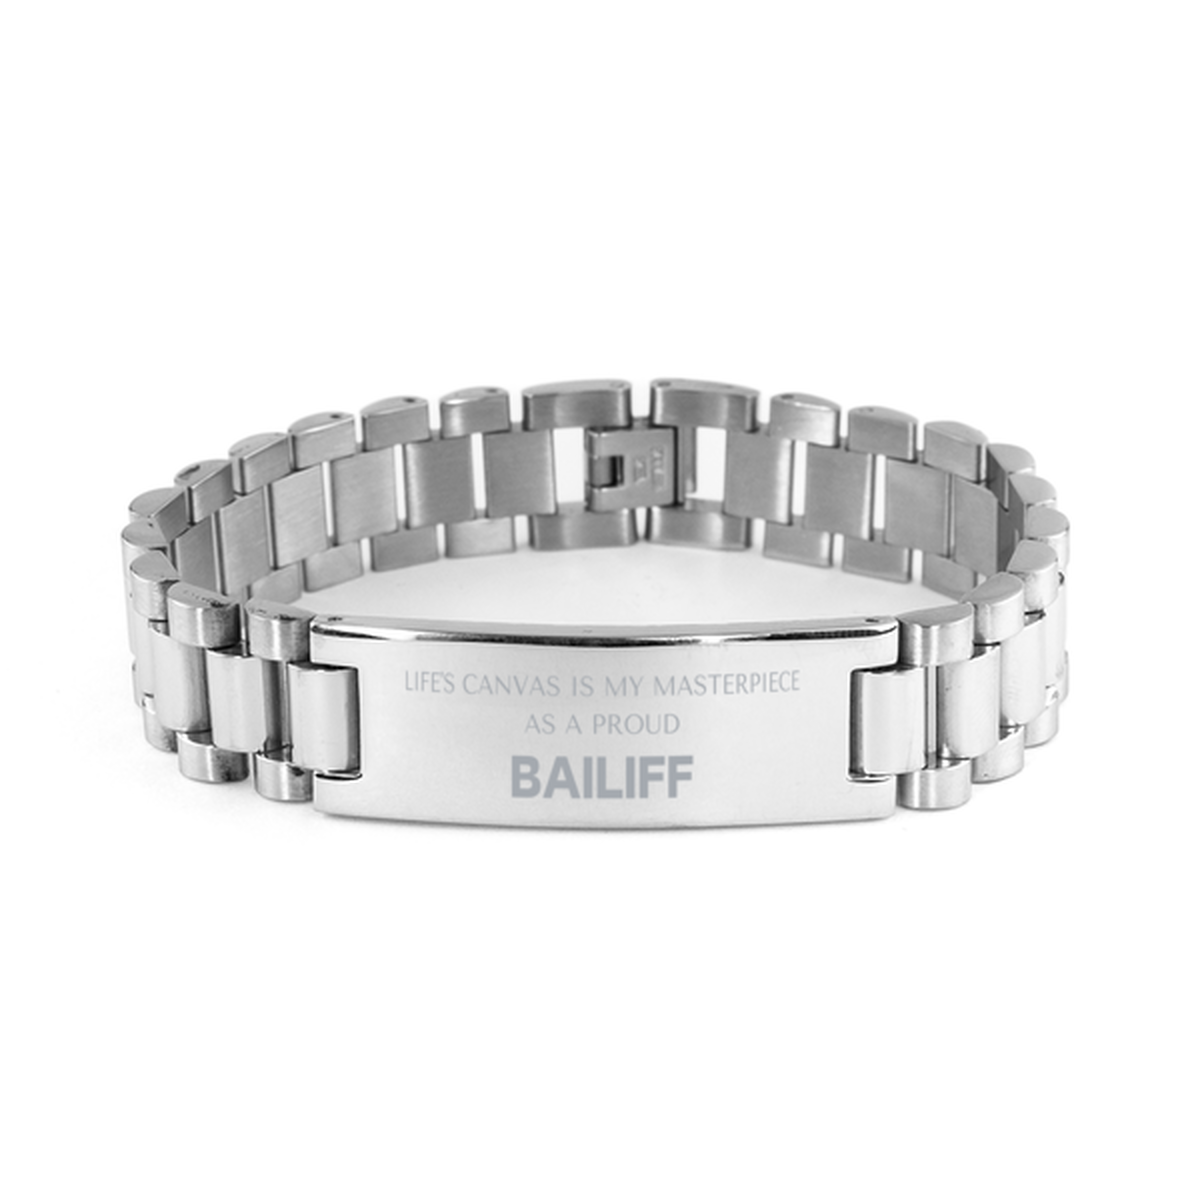 Proud Bailiff Gifts, Life's canvas is my masterpiece, Epic Birthday Christmas Unique Ladder Stainless Steel Bracelet For Bailiff, Coworkers, Men, Women, Friends